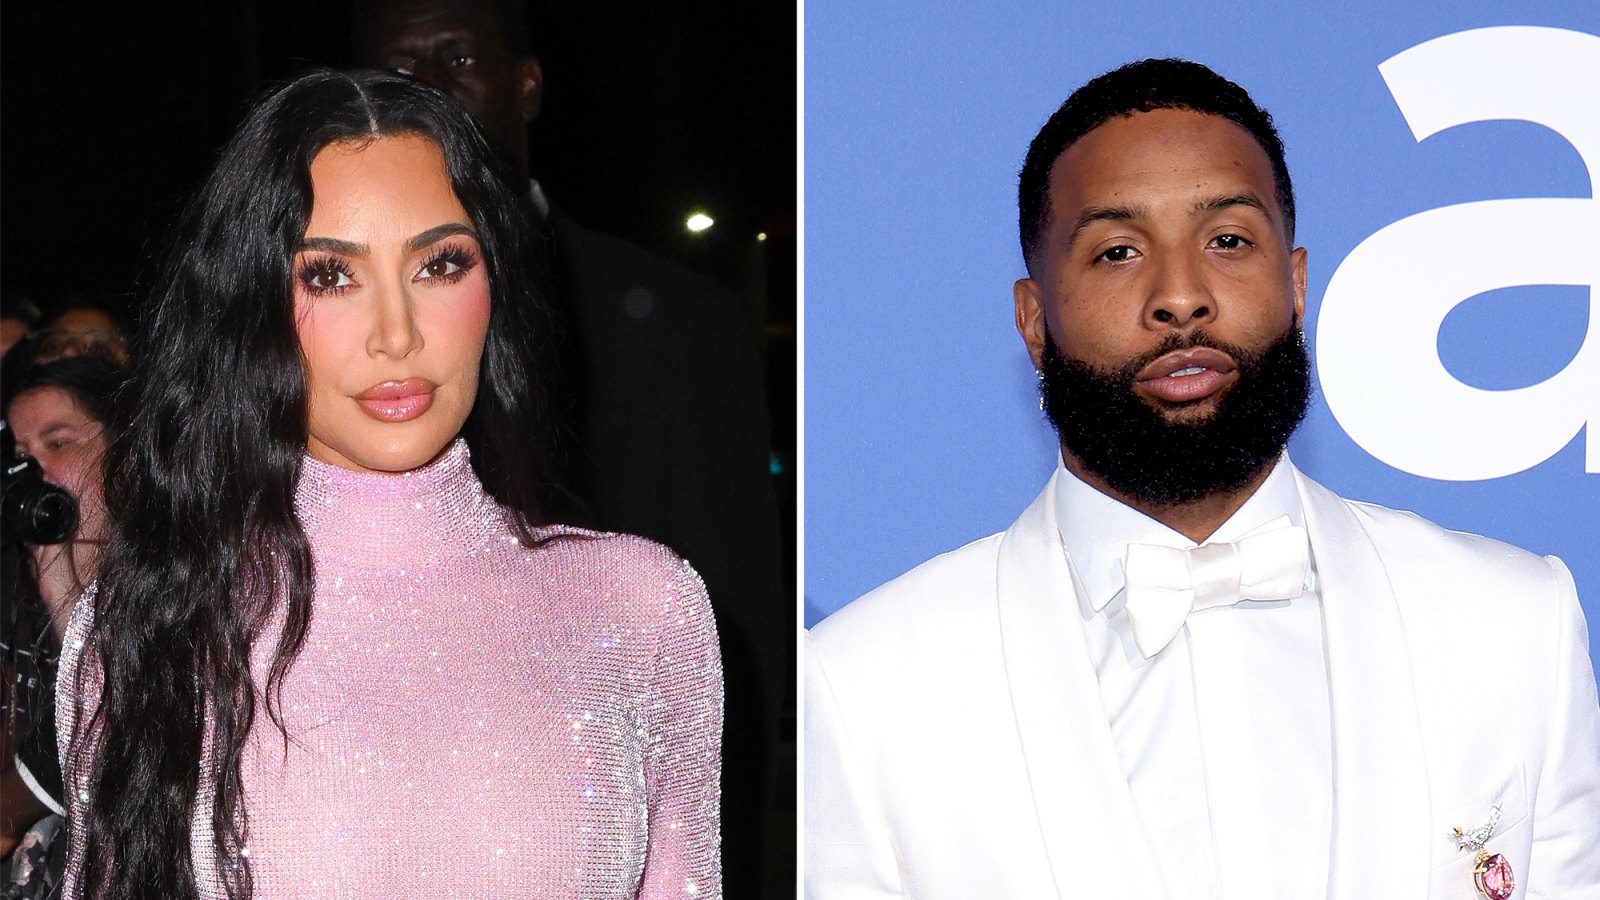 Kim Kardashian and Odell Beckham Jr Have Fairly Casual Relationship